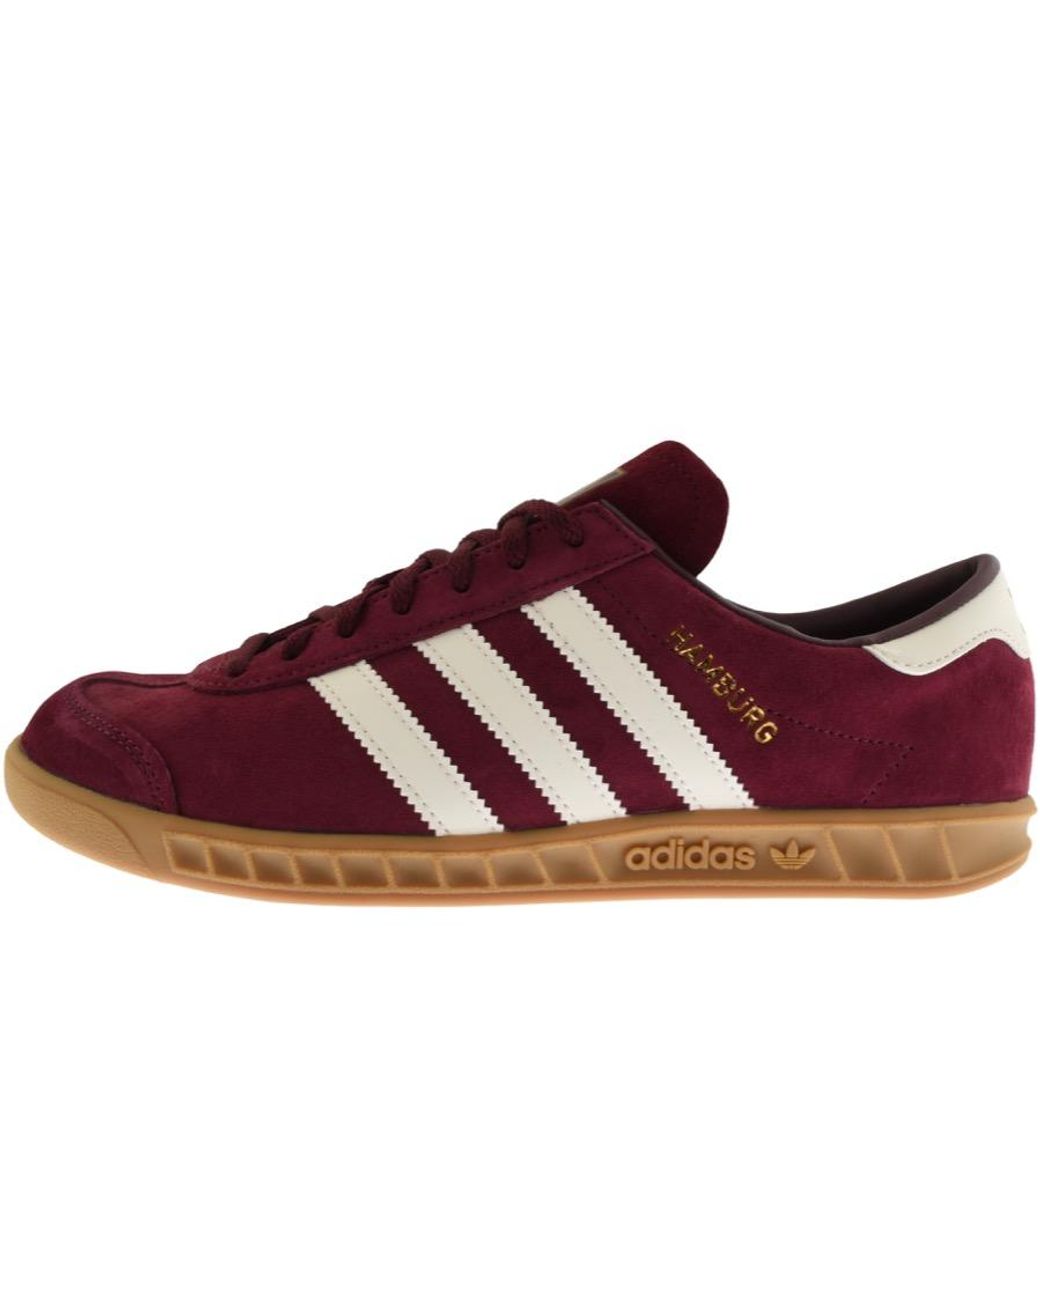 Siblings Sick person preposition adidas Originals Hamburg Trainers Burgundy in Red for Men | Lyst